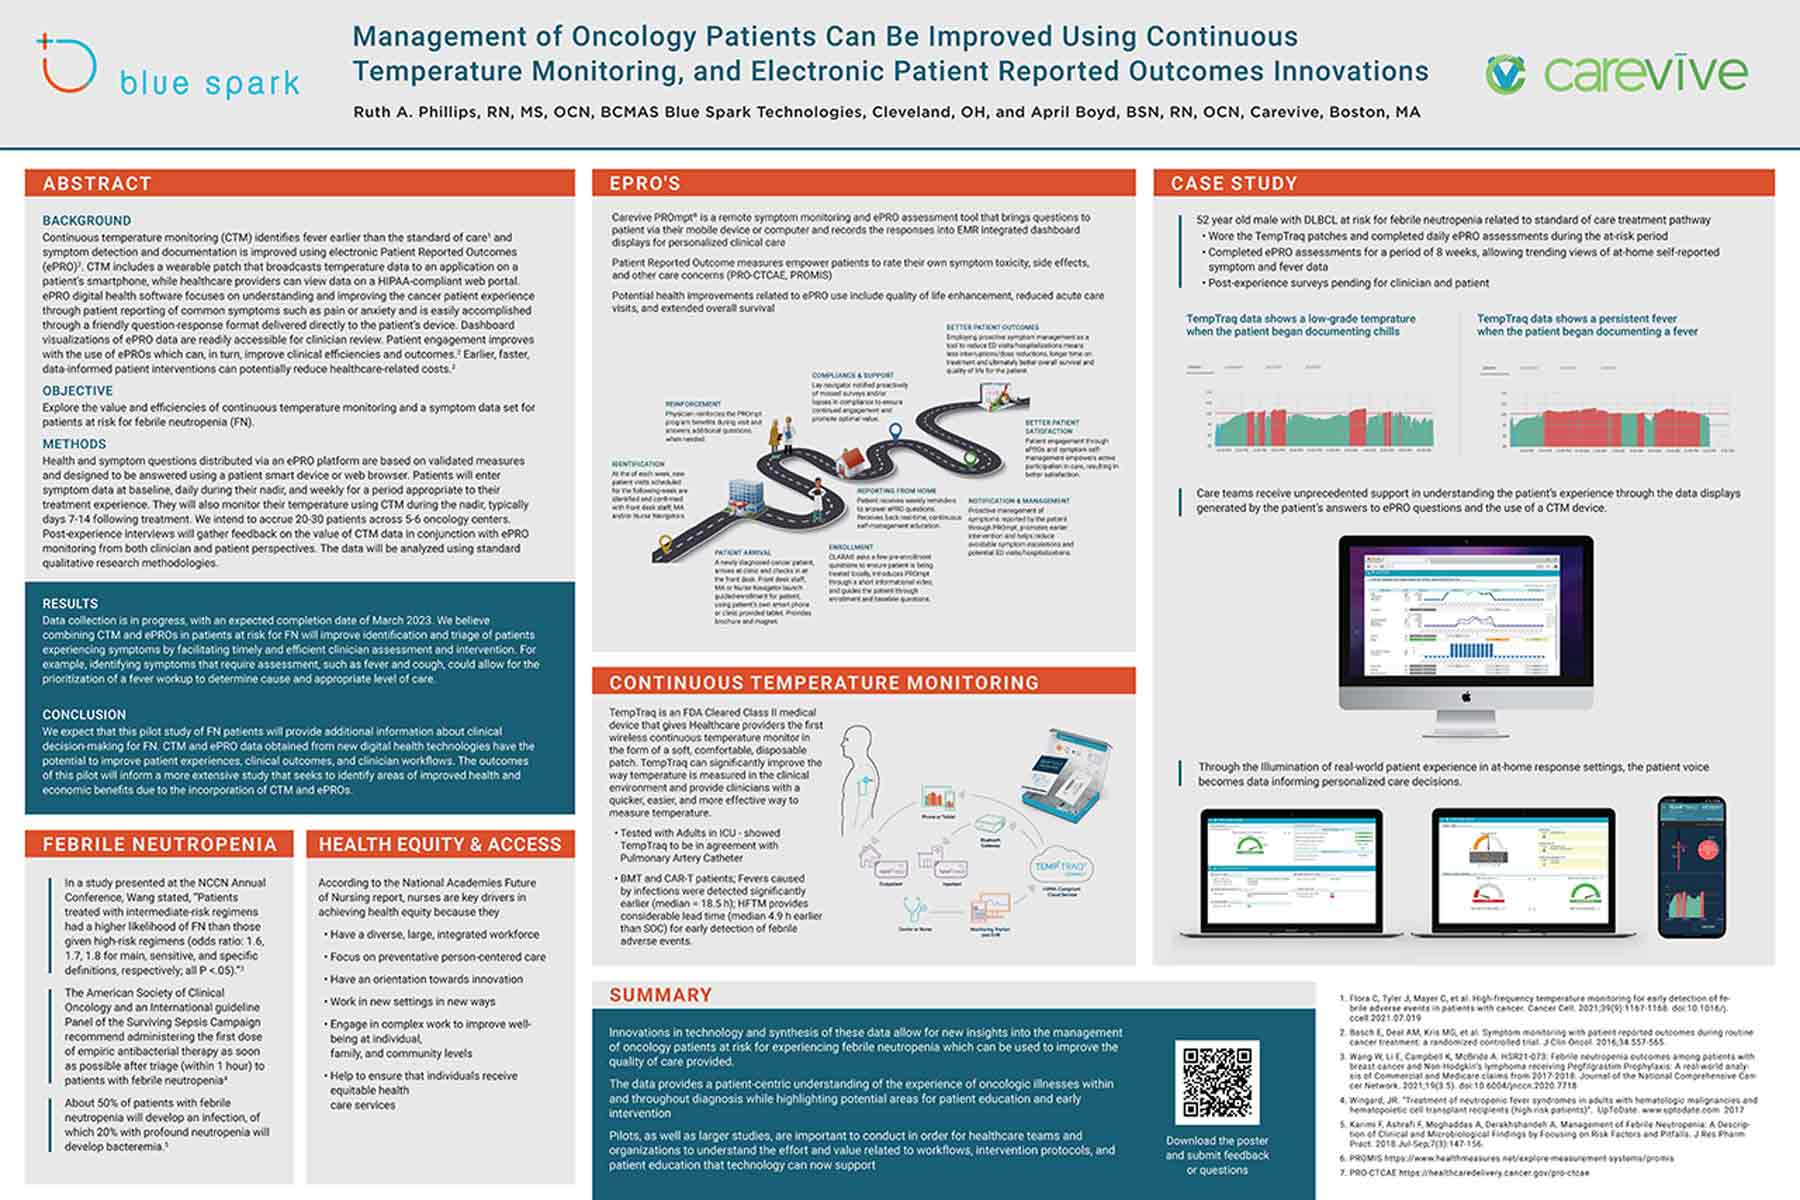 Poster: Management of Oncology Patients Can Be Improved Using Continuous Temperature Monitoring, and Electronic Patient Reported Outcomes Innovations